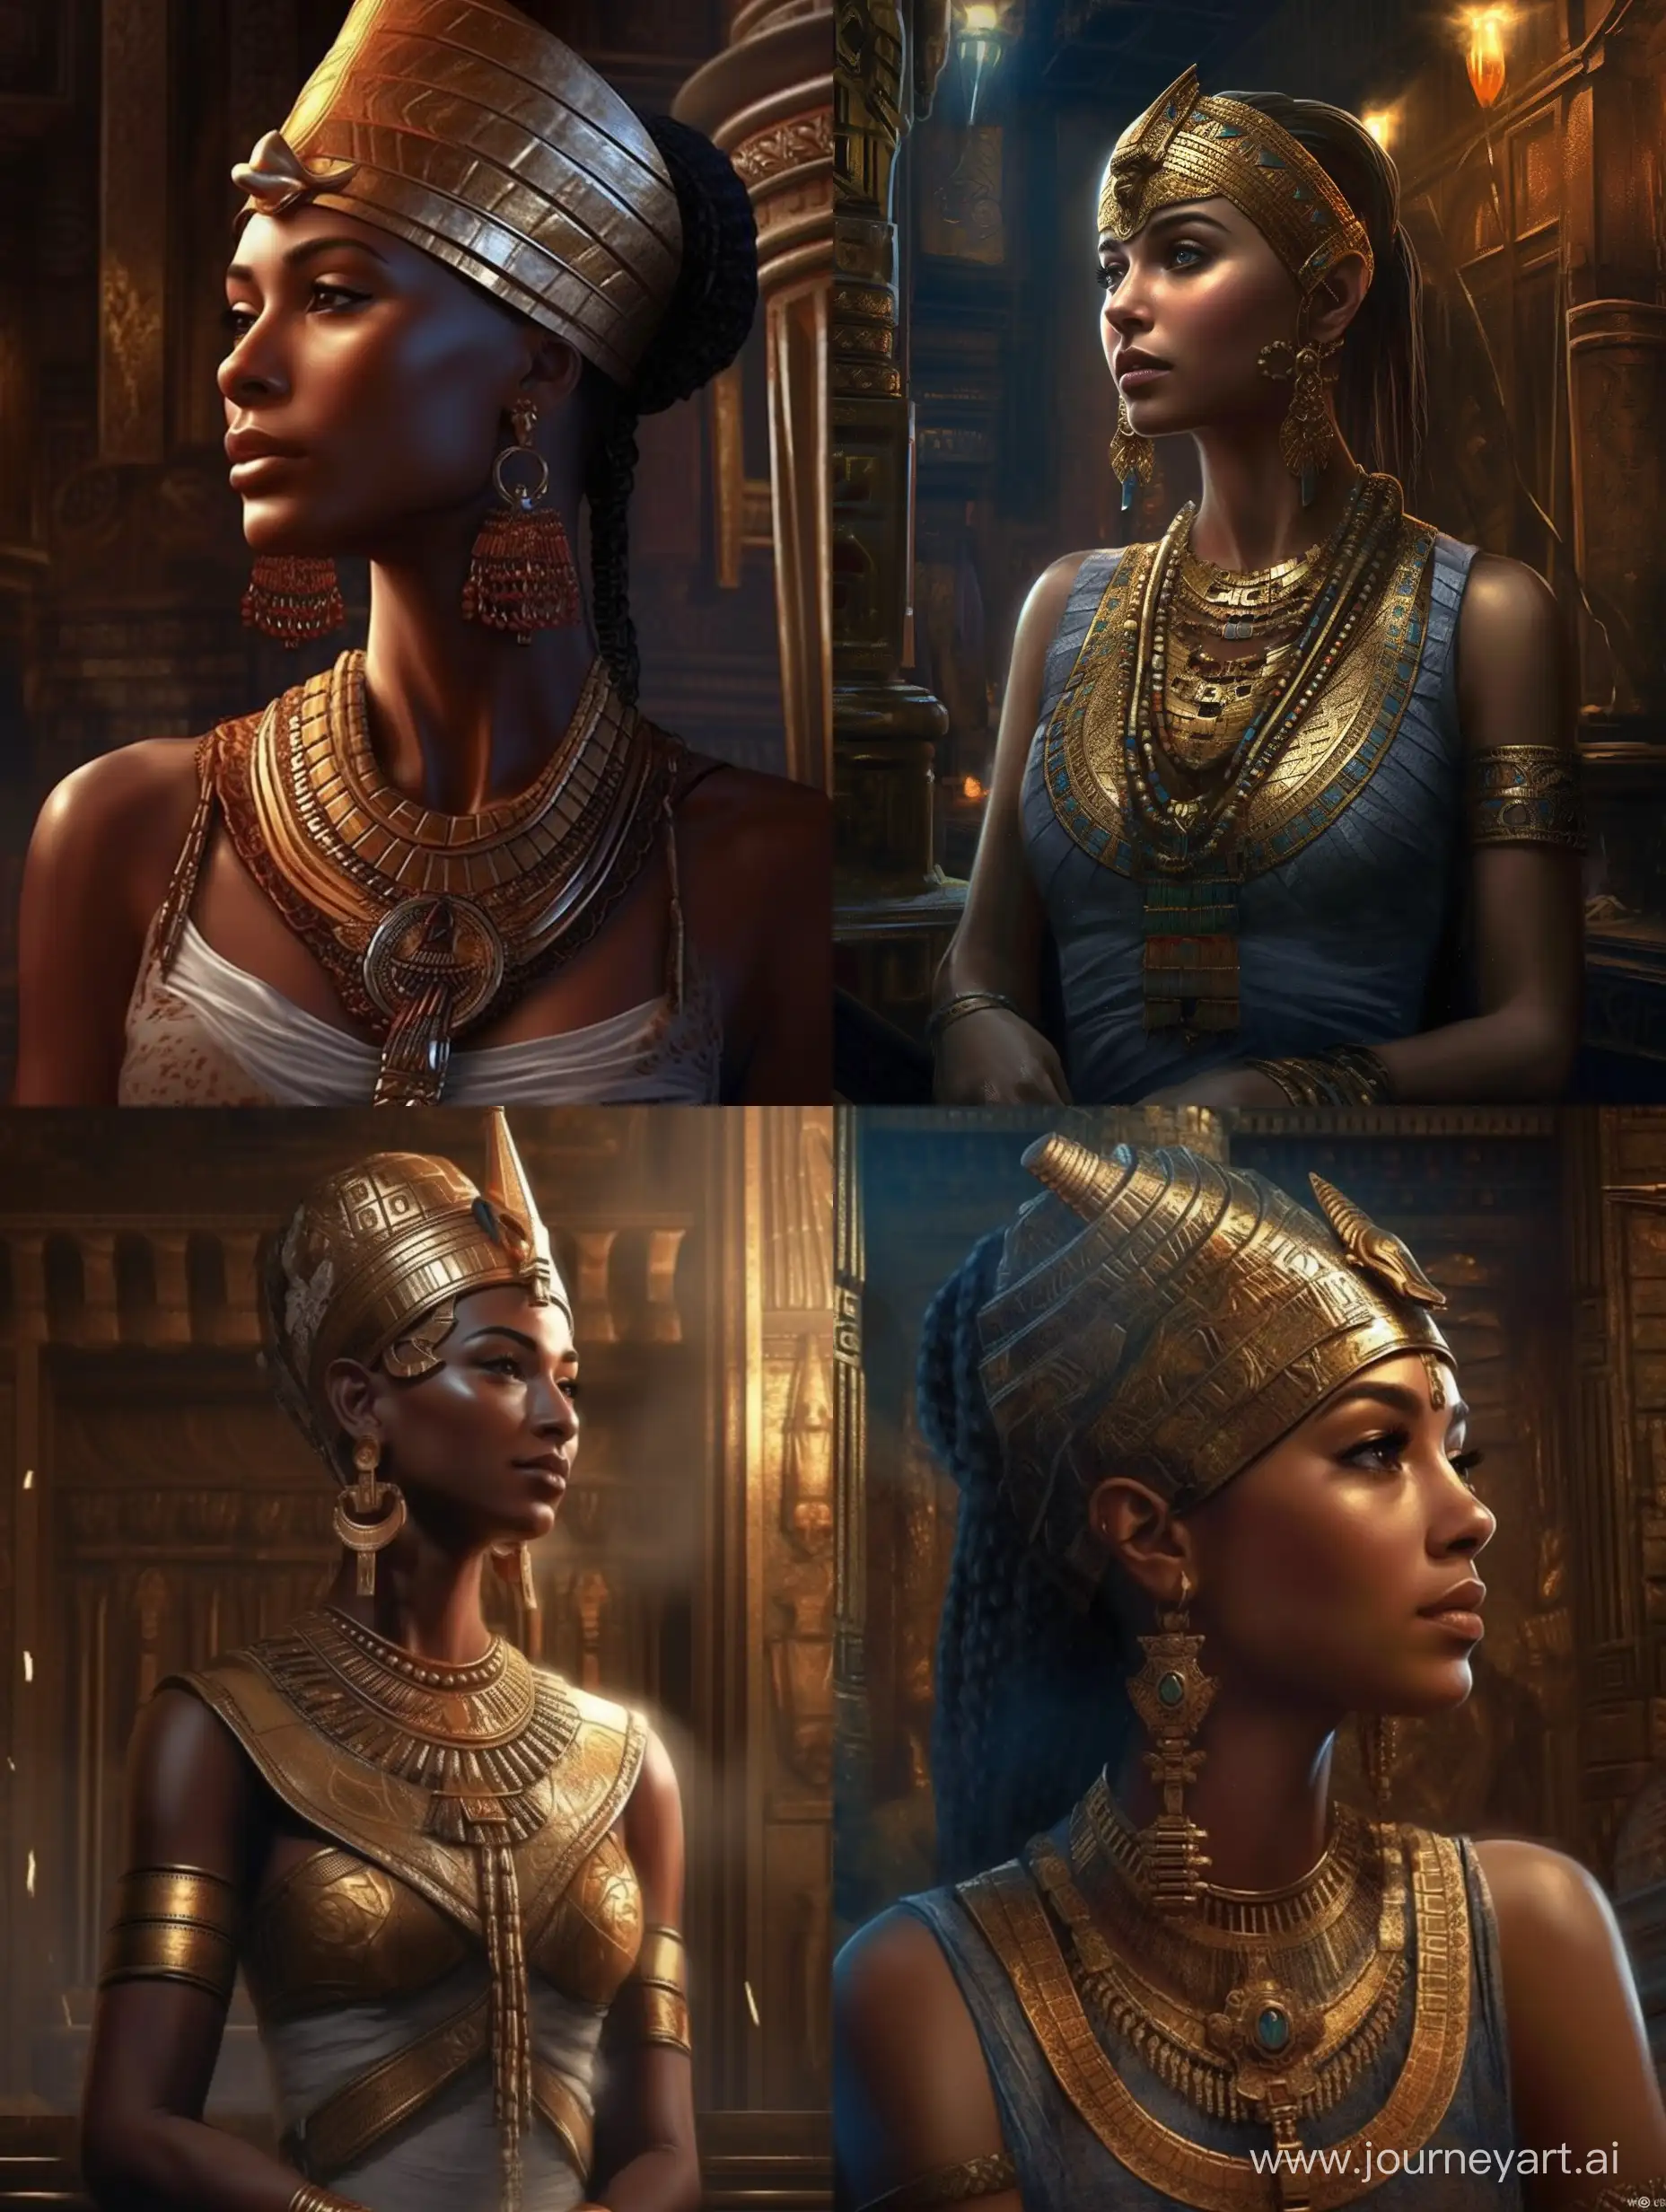 /imagine prompt: A photorealistic portrait that captures the essence of the Egyptian queen Nefertiti. The atmosphere is regal, with the lighting emphasizing the details of her beautiful face and white skin. The image has a high quality, with intricate details in Nefertiti's facial features and jewelry. Nefertiti is shown in a close-up, with a serene expression on her face as she looks straight ahead. Her round eyes are captivating, adding to the beauty of the image. The background is simple, with a neutral color that emphasizes the focus on Nefertiti and her features. The composition is elegant, with the focus on Nefertiti and her regal presence. The image is highly detailed, with intricate details in Nefertiti's facial features and jewelry. The image has a high quality, with a photorealistic quality that allows for every detail to be seen clearly. It's a perfect fit for those who appreciate the beauty and elegance of ancient Egyptian art and the iconic figure of Nefertiti. --ar 3:4 --s 800 --v 5 --q 2